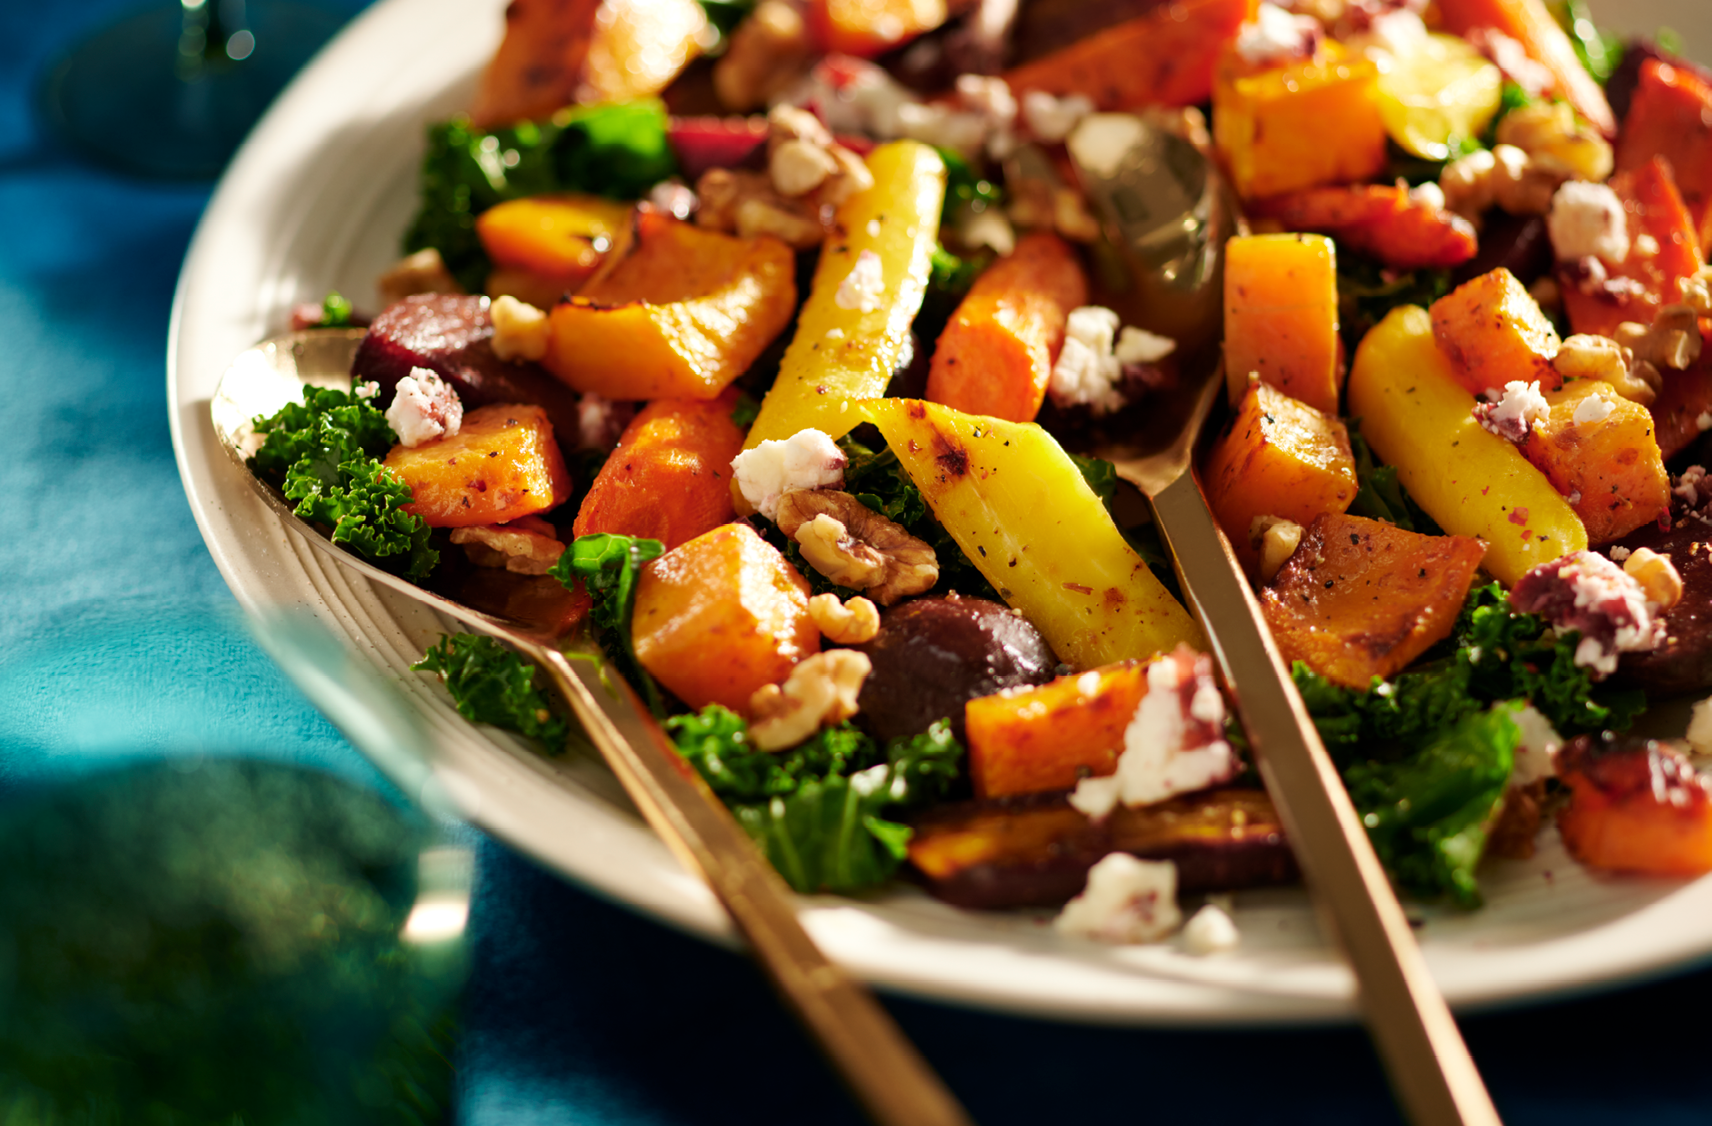 A close up image of a hearty cranberry salad with chucks of assorted root vegetables